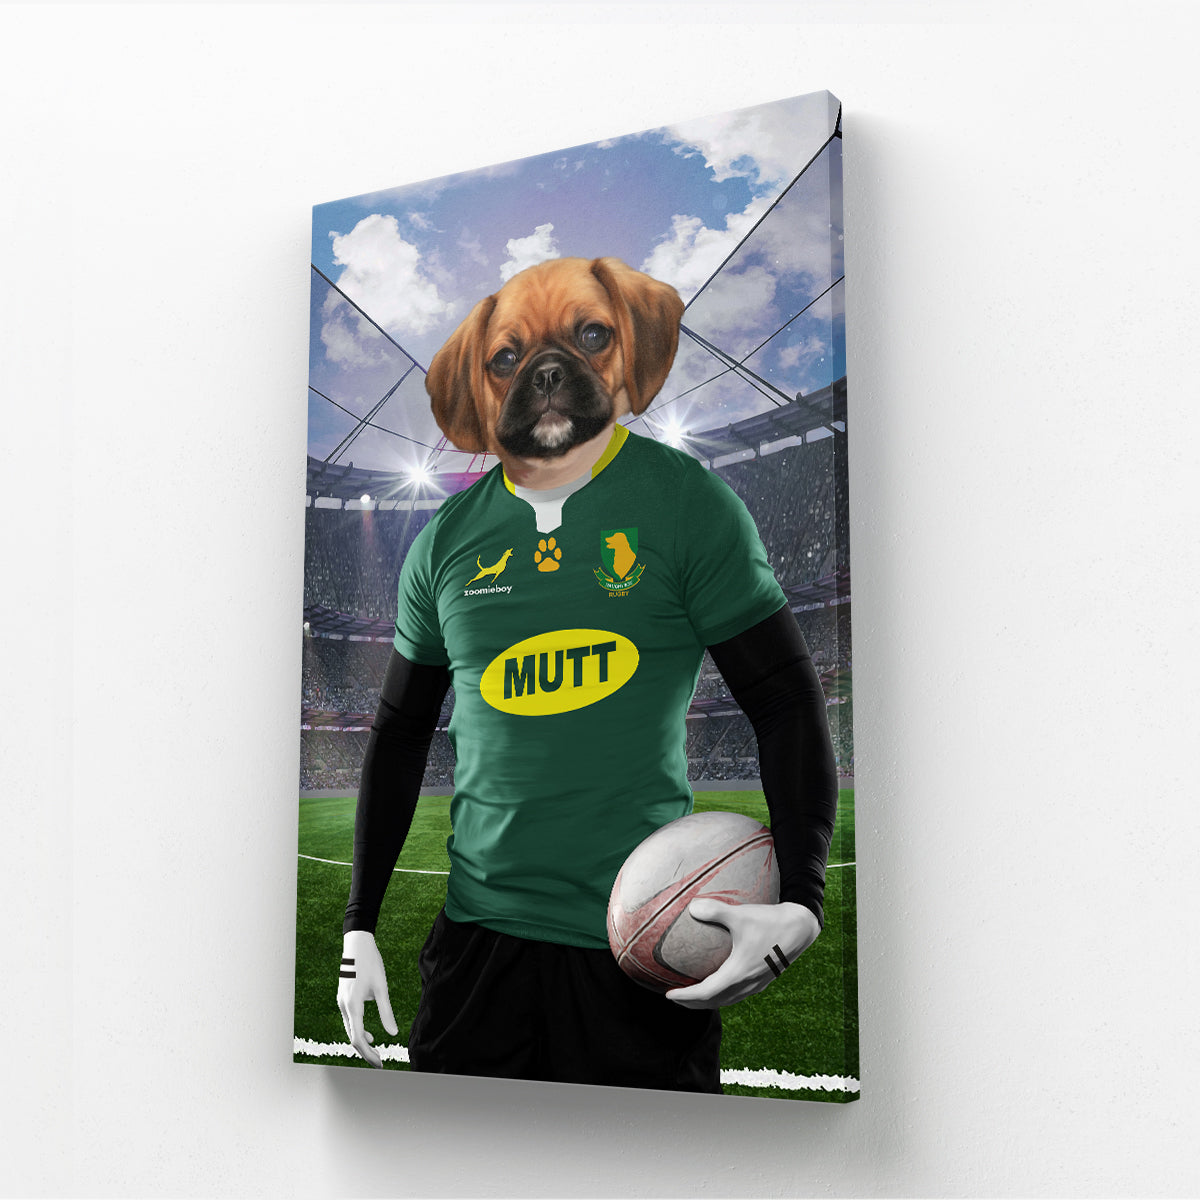 South Africa Rugby Team: Paw & Glory, pawandglory, custom pet painting, dog canvas art, paintings of pets from photos, custom dog painting, pet portraits, funny dog paintings, small dog portrait